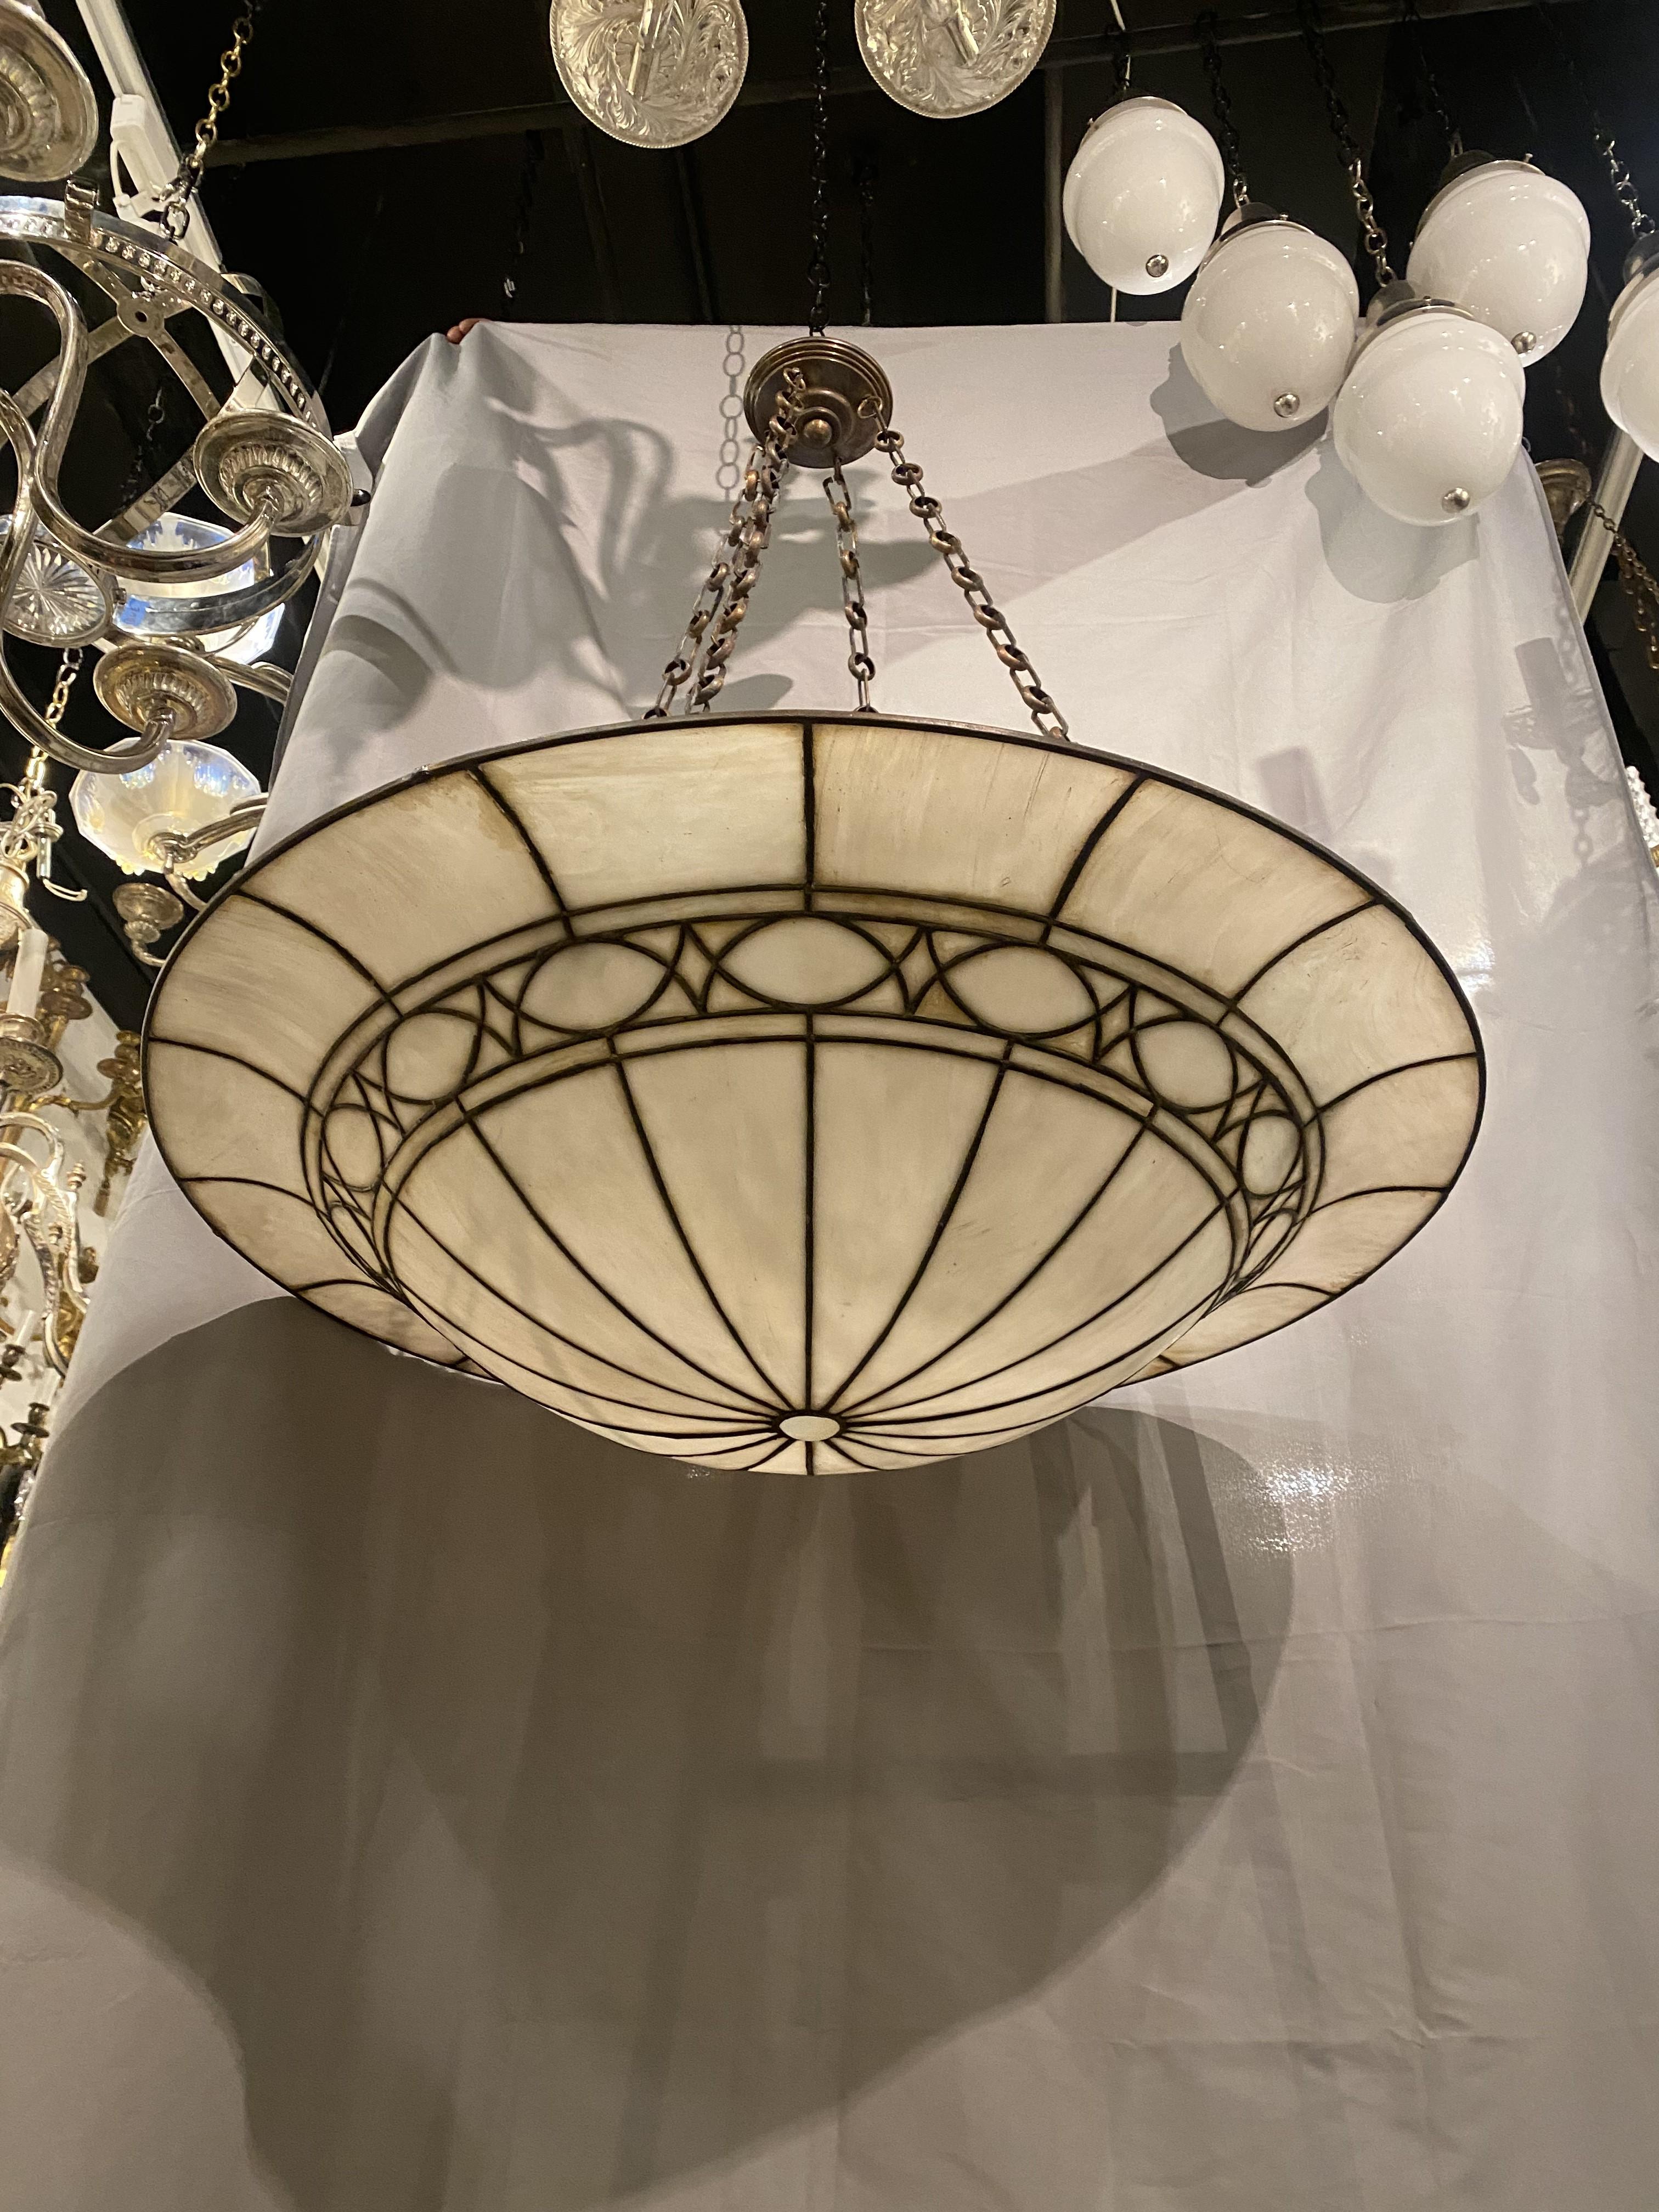 American Large Unusual Leaded Glass Light Fixture For Sale